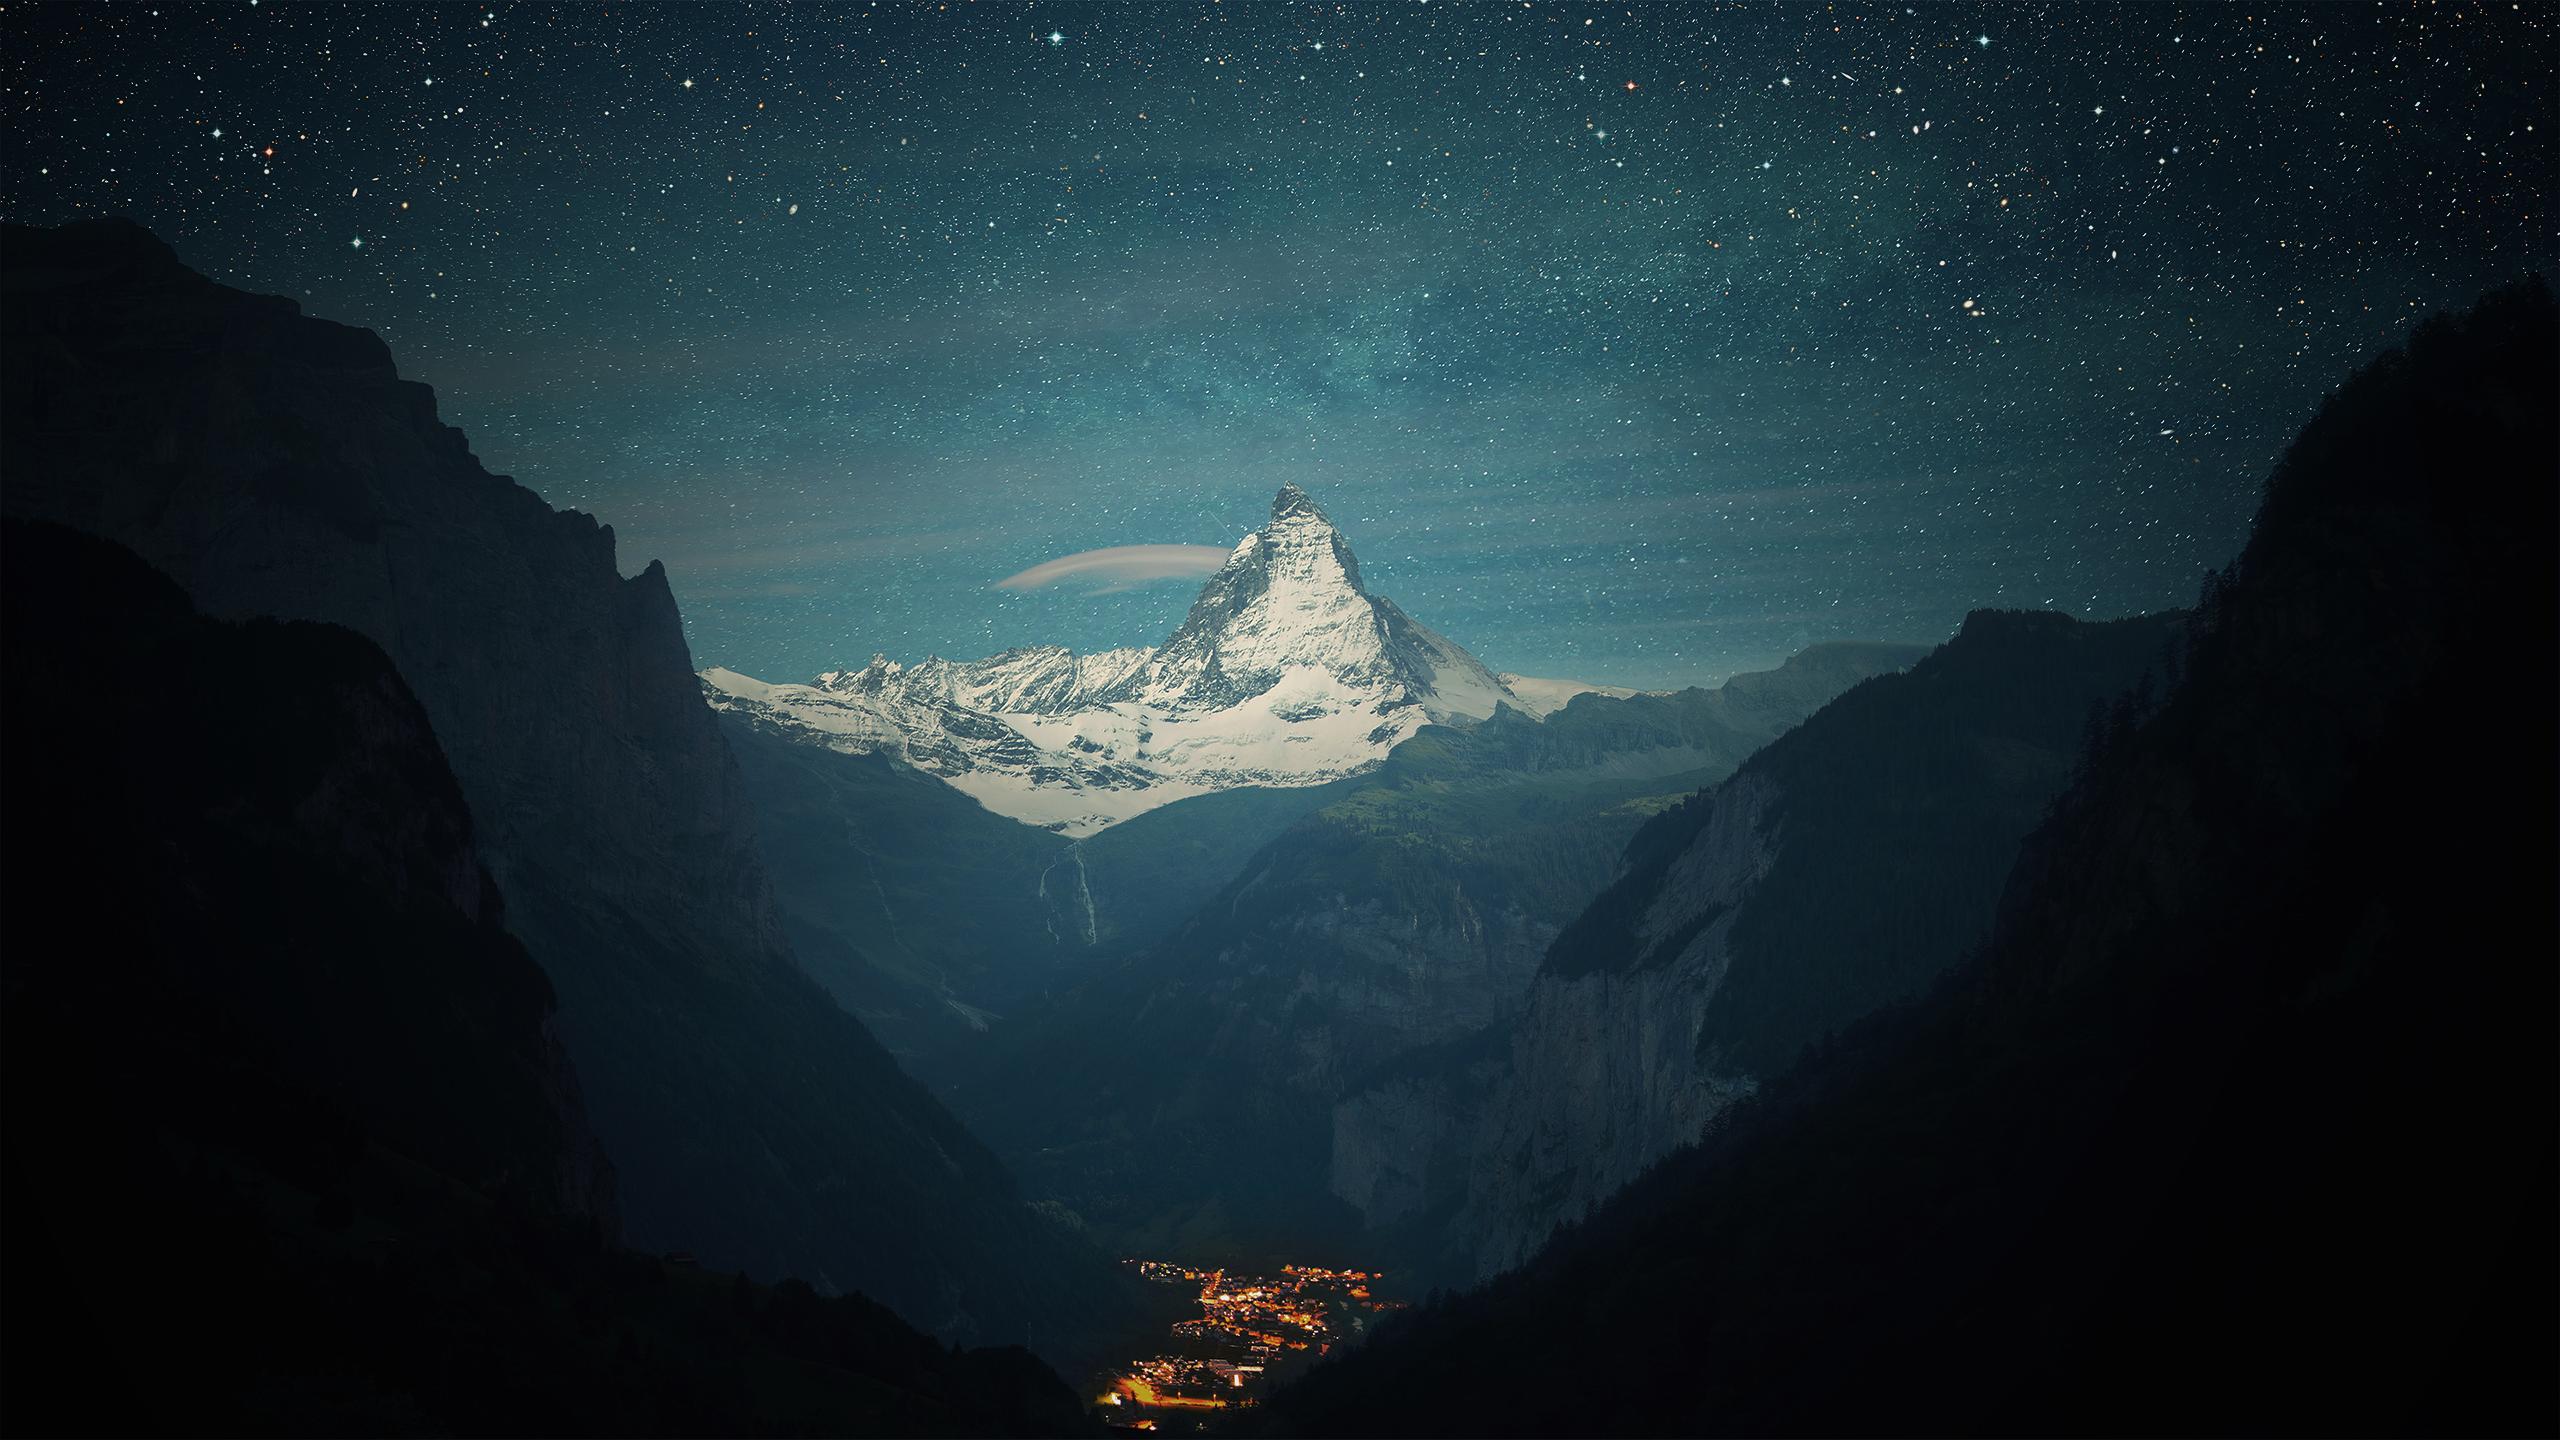 Valley of the Stars Matterhorn as seen from the Lauterbrunnen valley. [1920x1080] (7 other resolutions including mobile in comments) Originally photographed